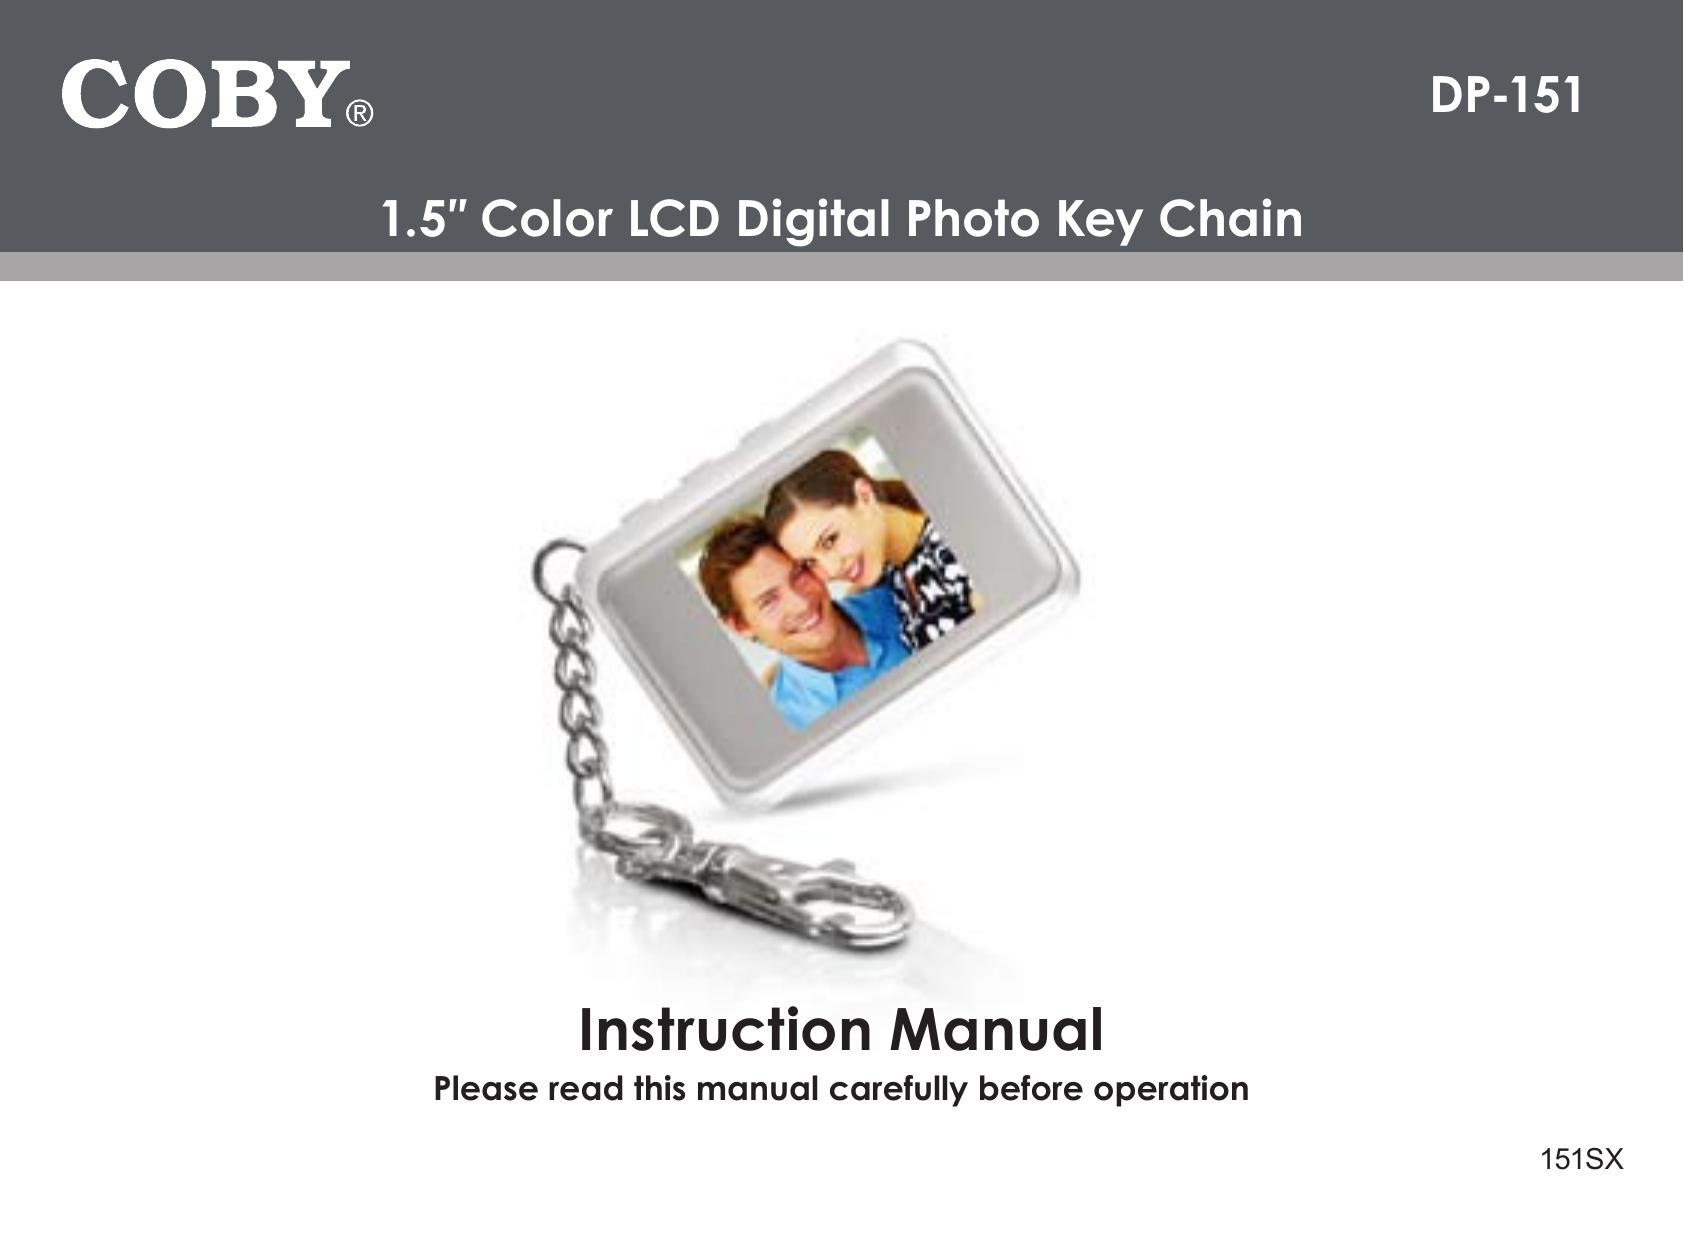 COBY electronic DP-151 Digital Photo Keychain User Manual